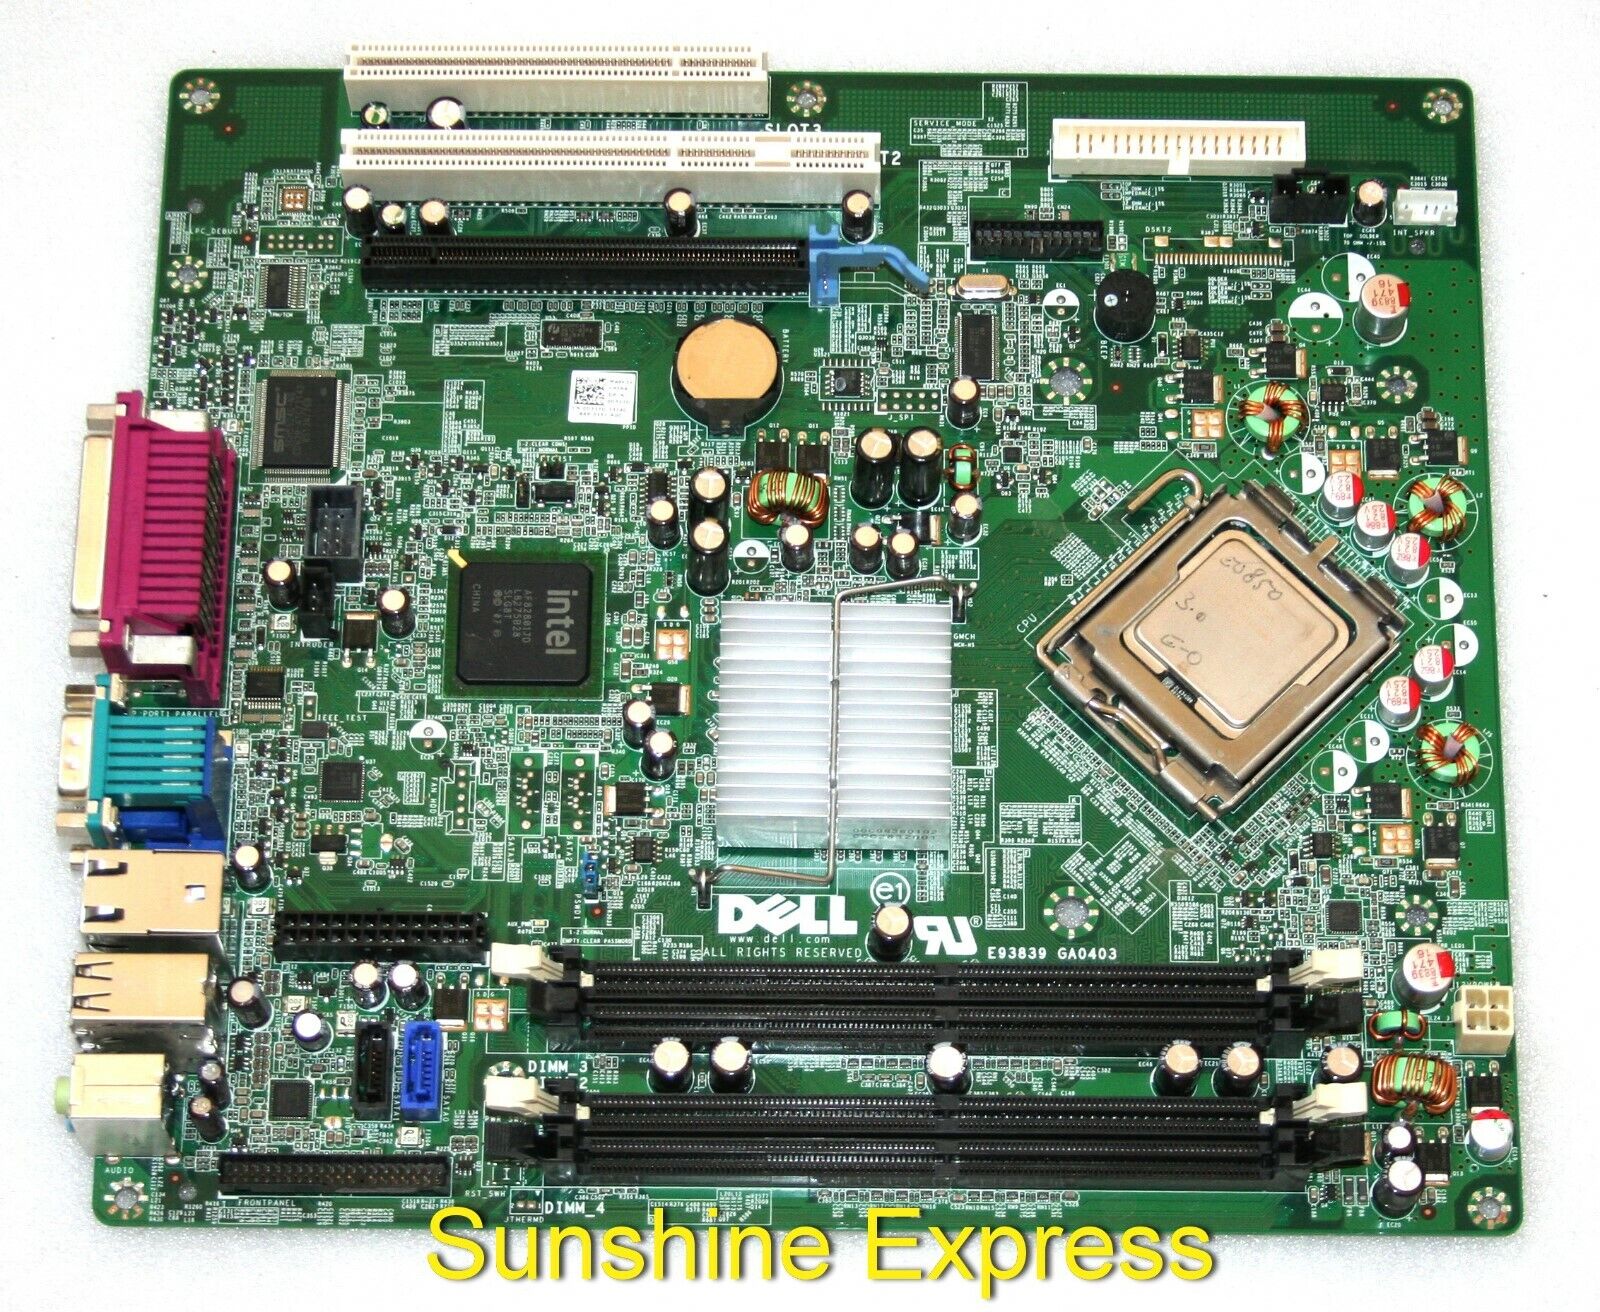 OEM Dell D517D Motherboard w/ Intel Core 2 Duo 3.33GHz CPU for OptiPlex 760 DT